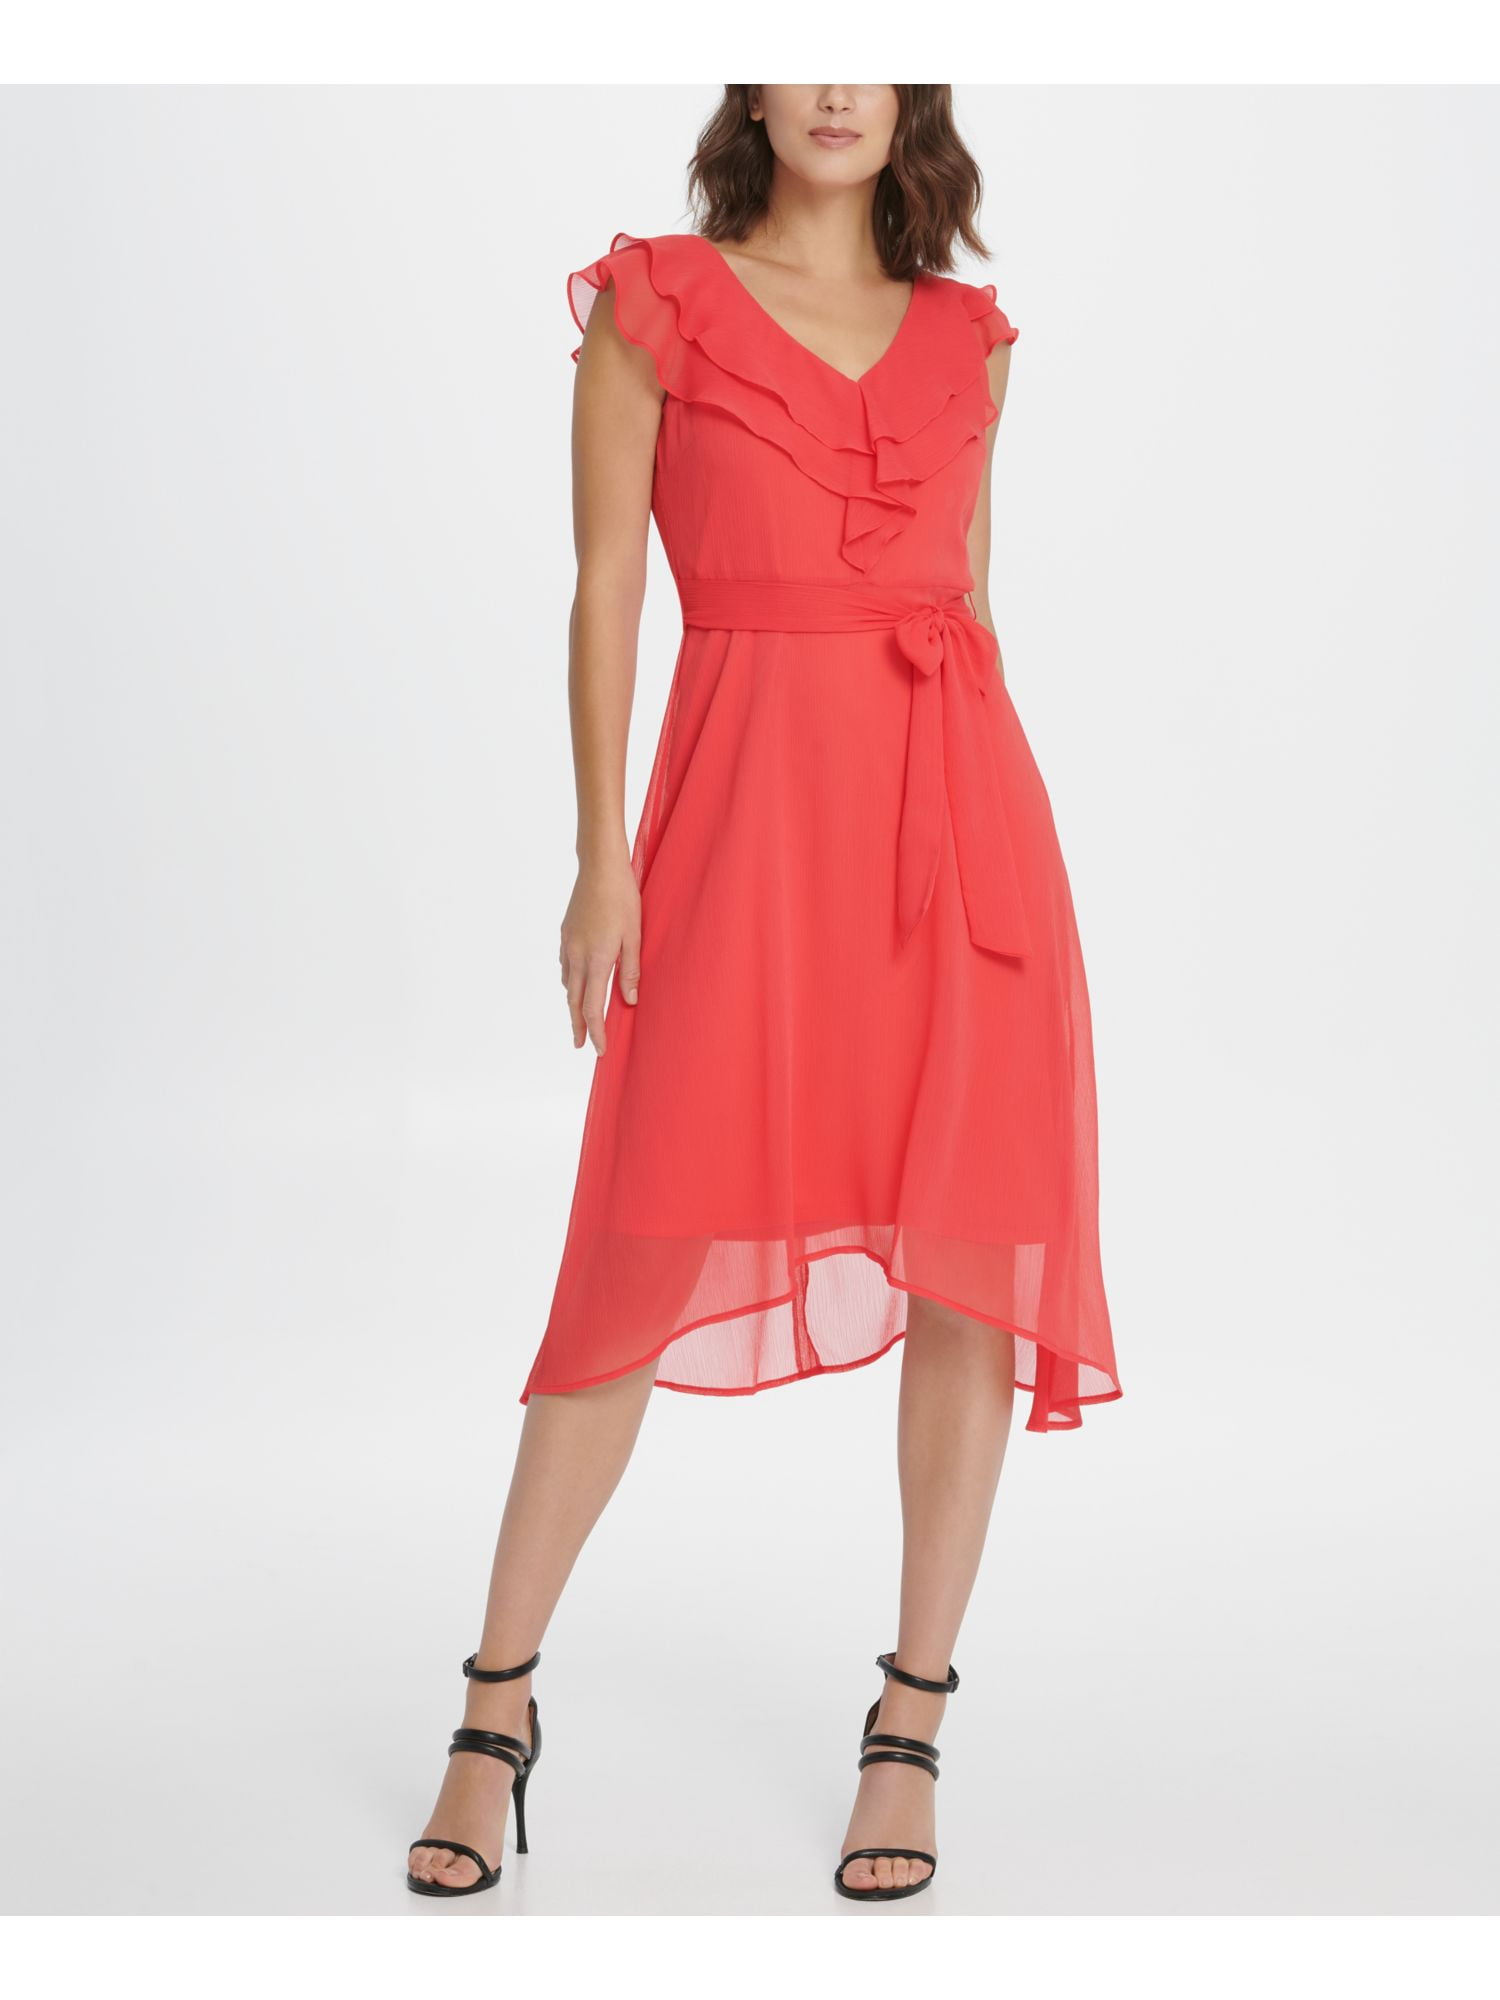 DKNY Women's Clothing, Clothes for Women